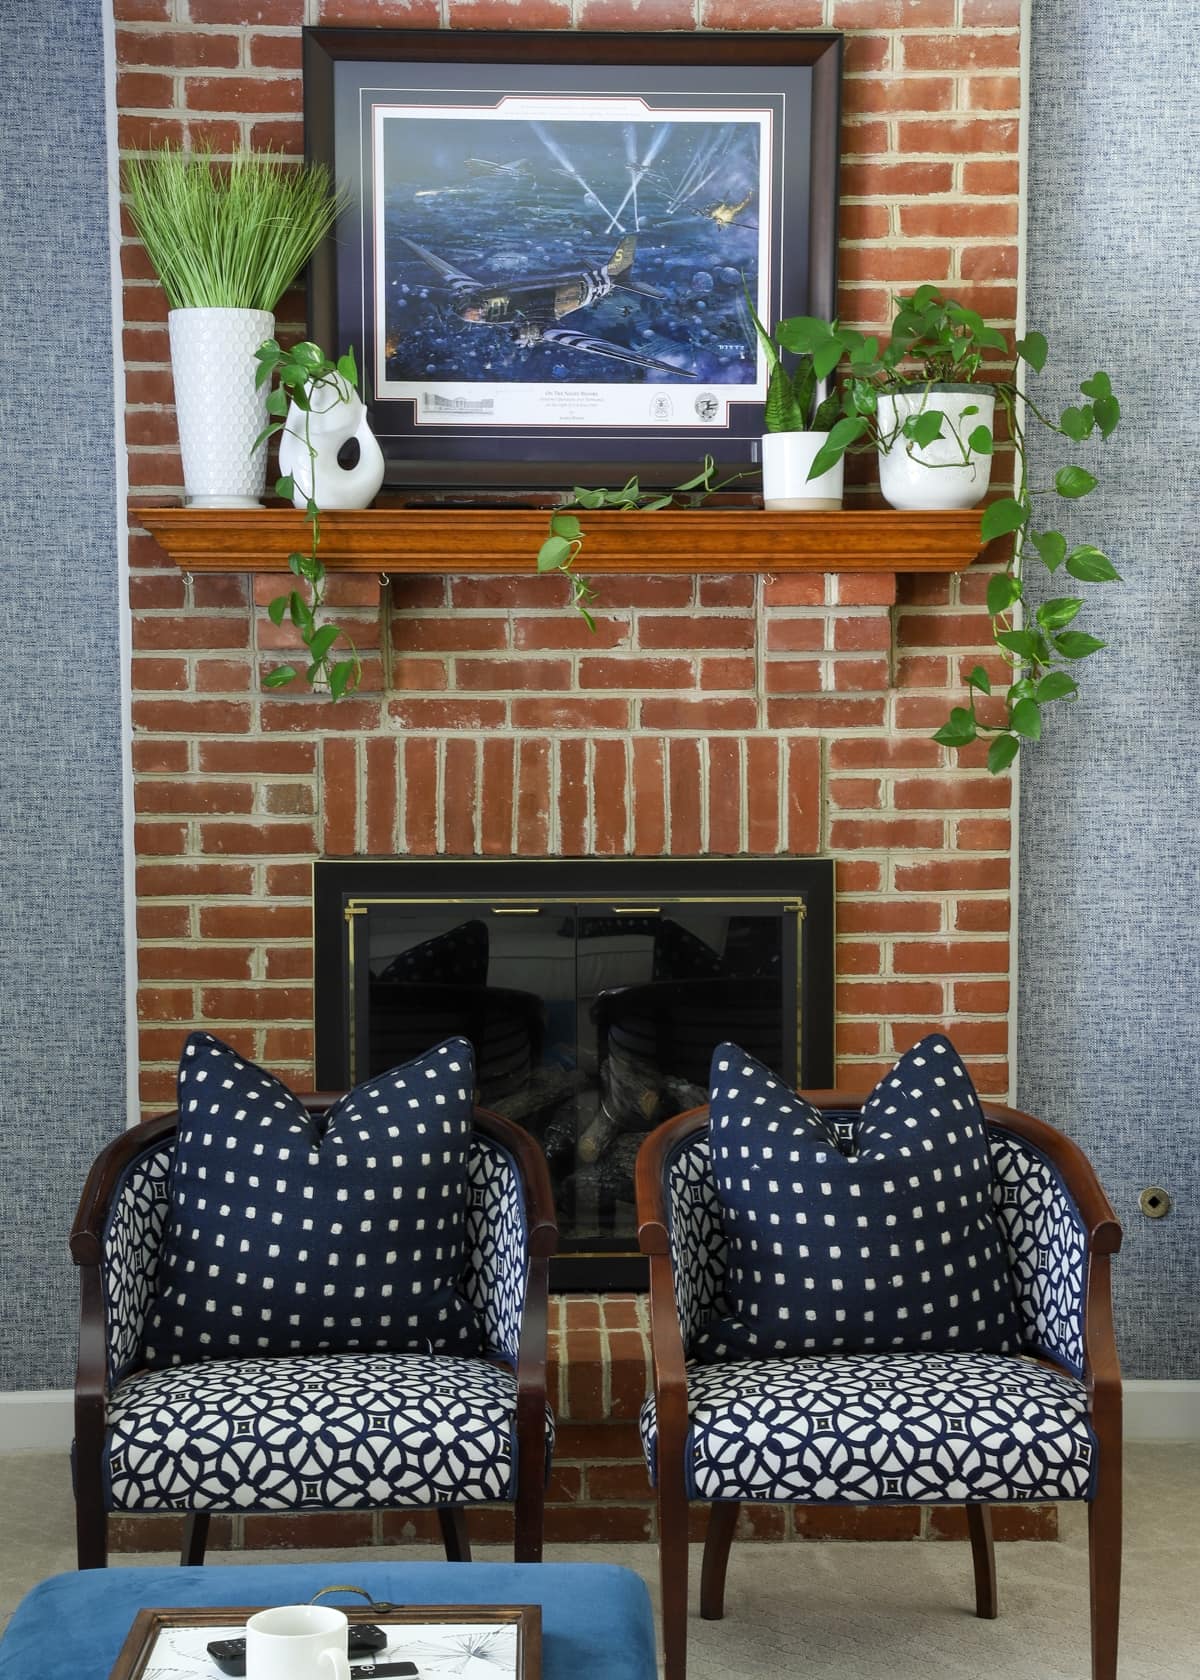 Red brick fireplace with navy blue wallpaper and patterned chairs in front